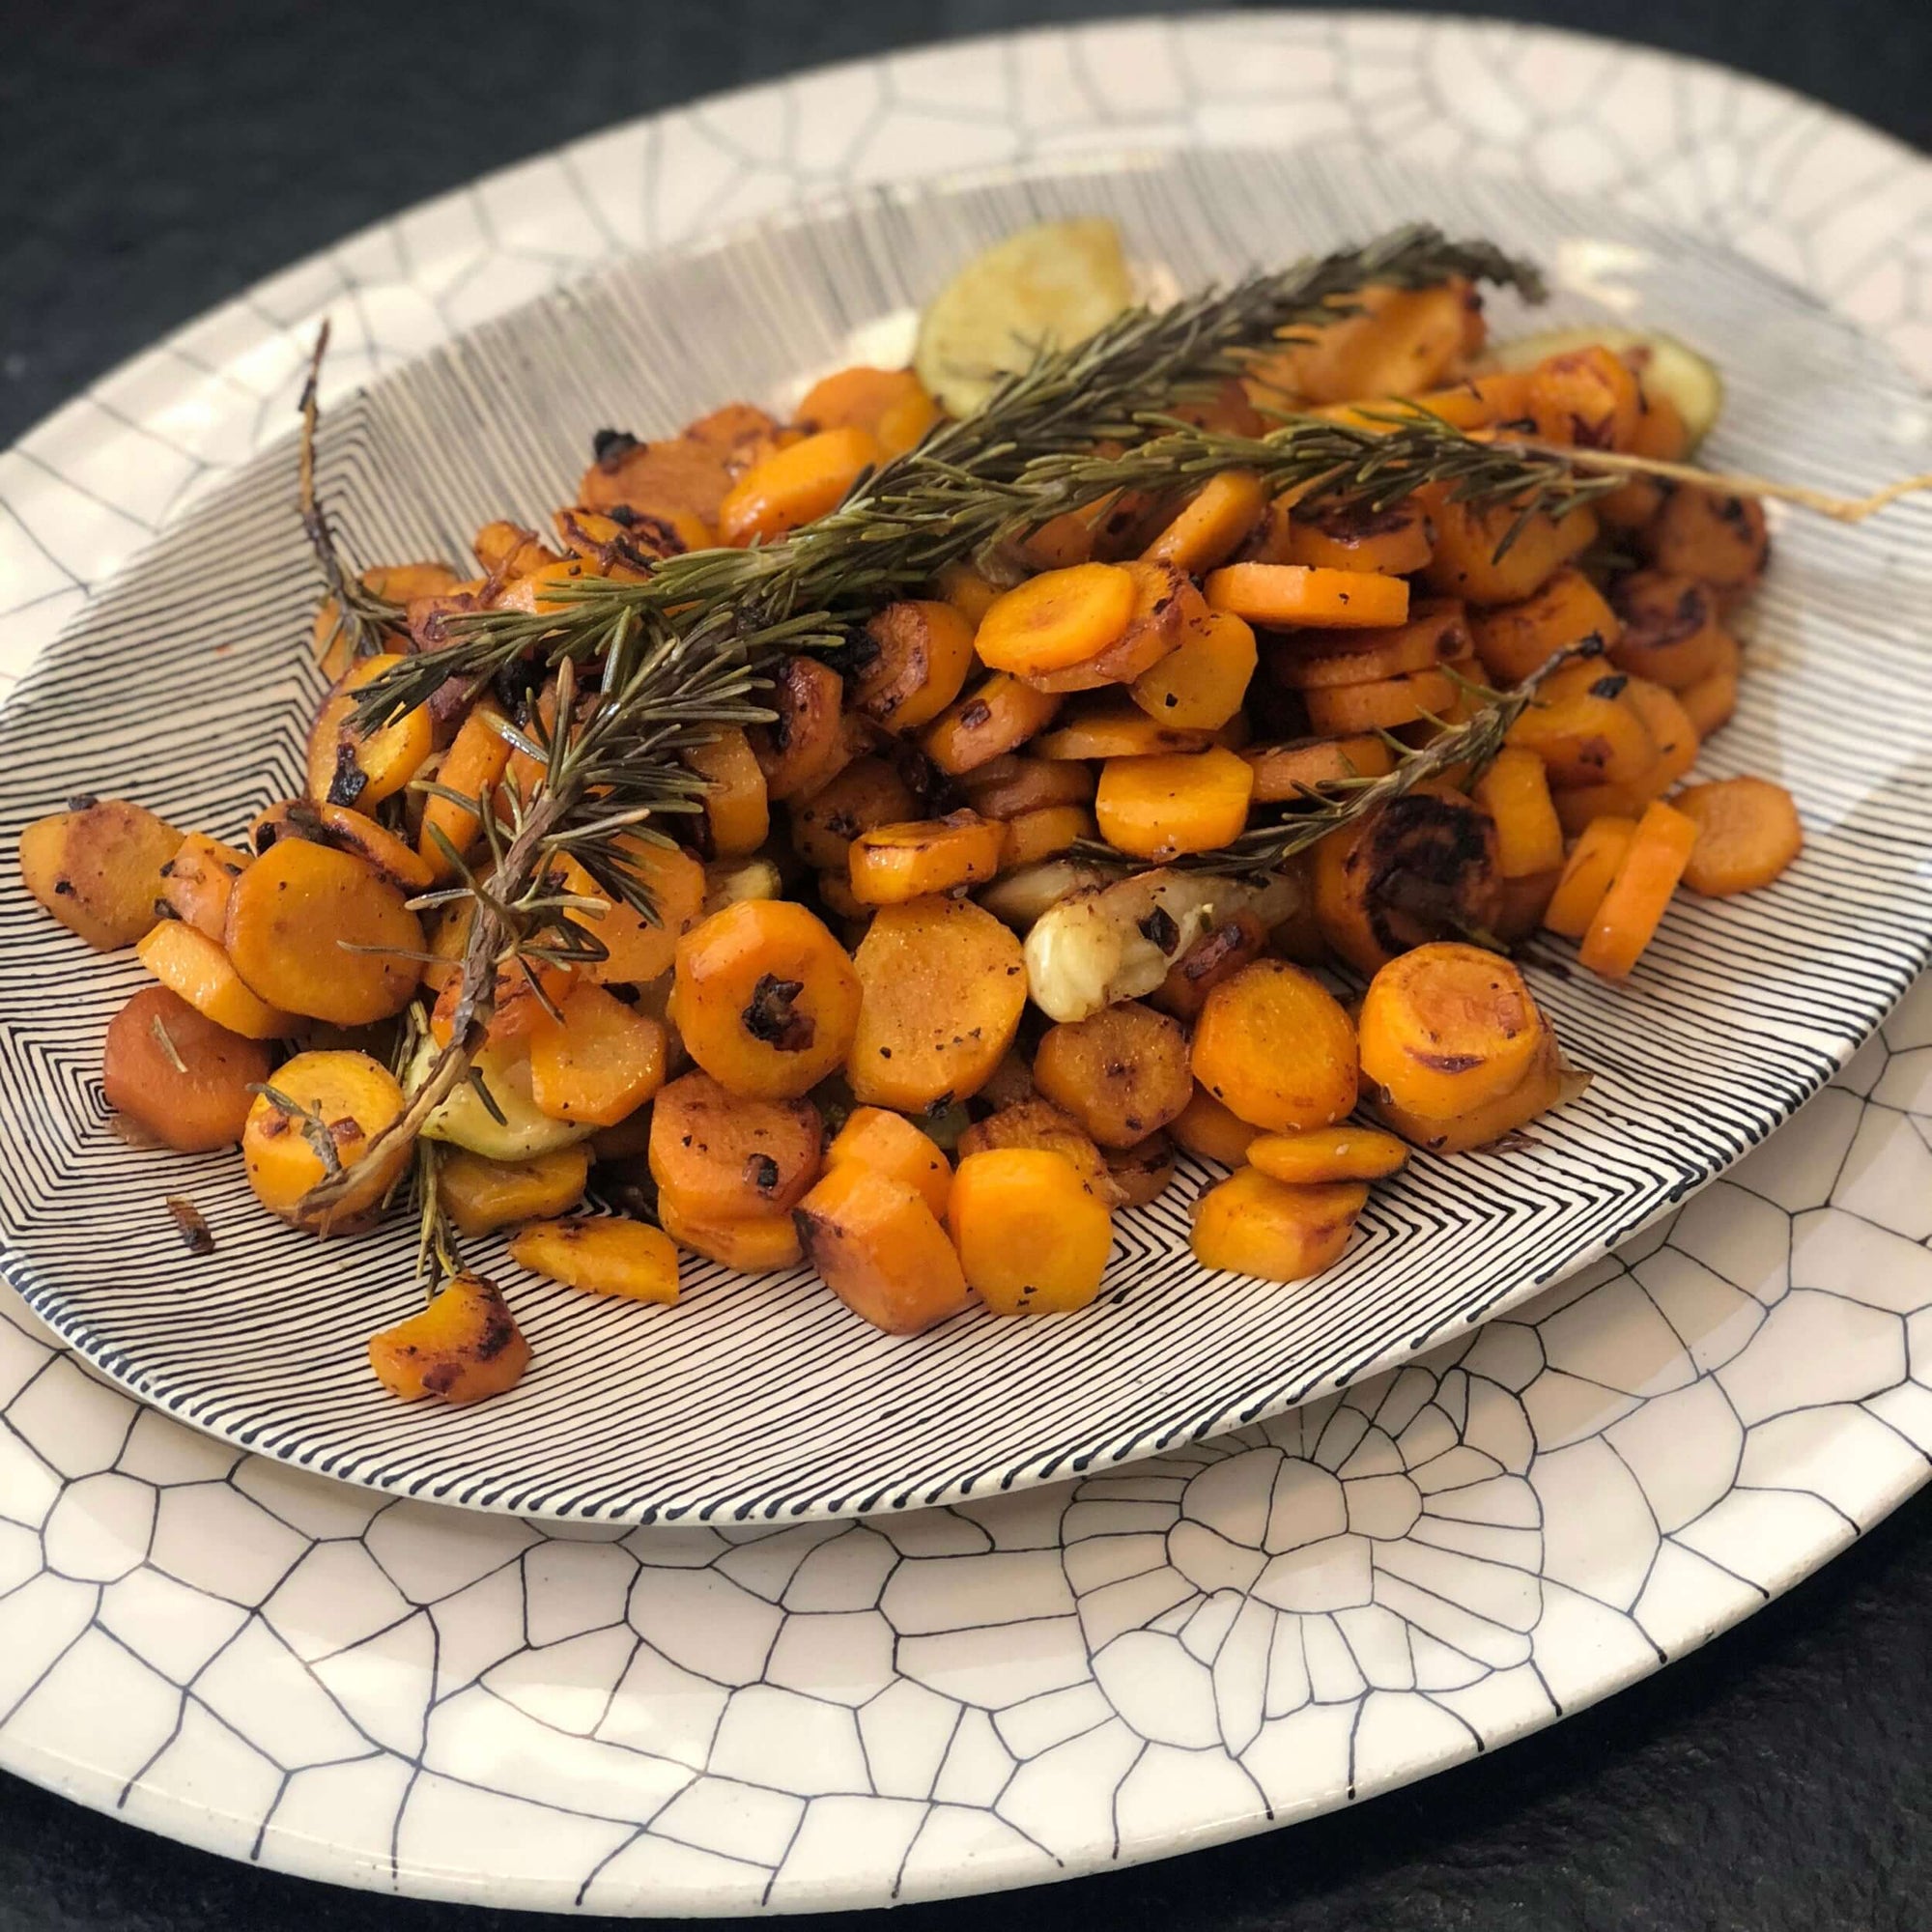 Roasted carrots with garlic and thyme